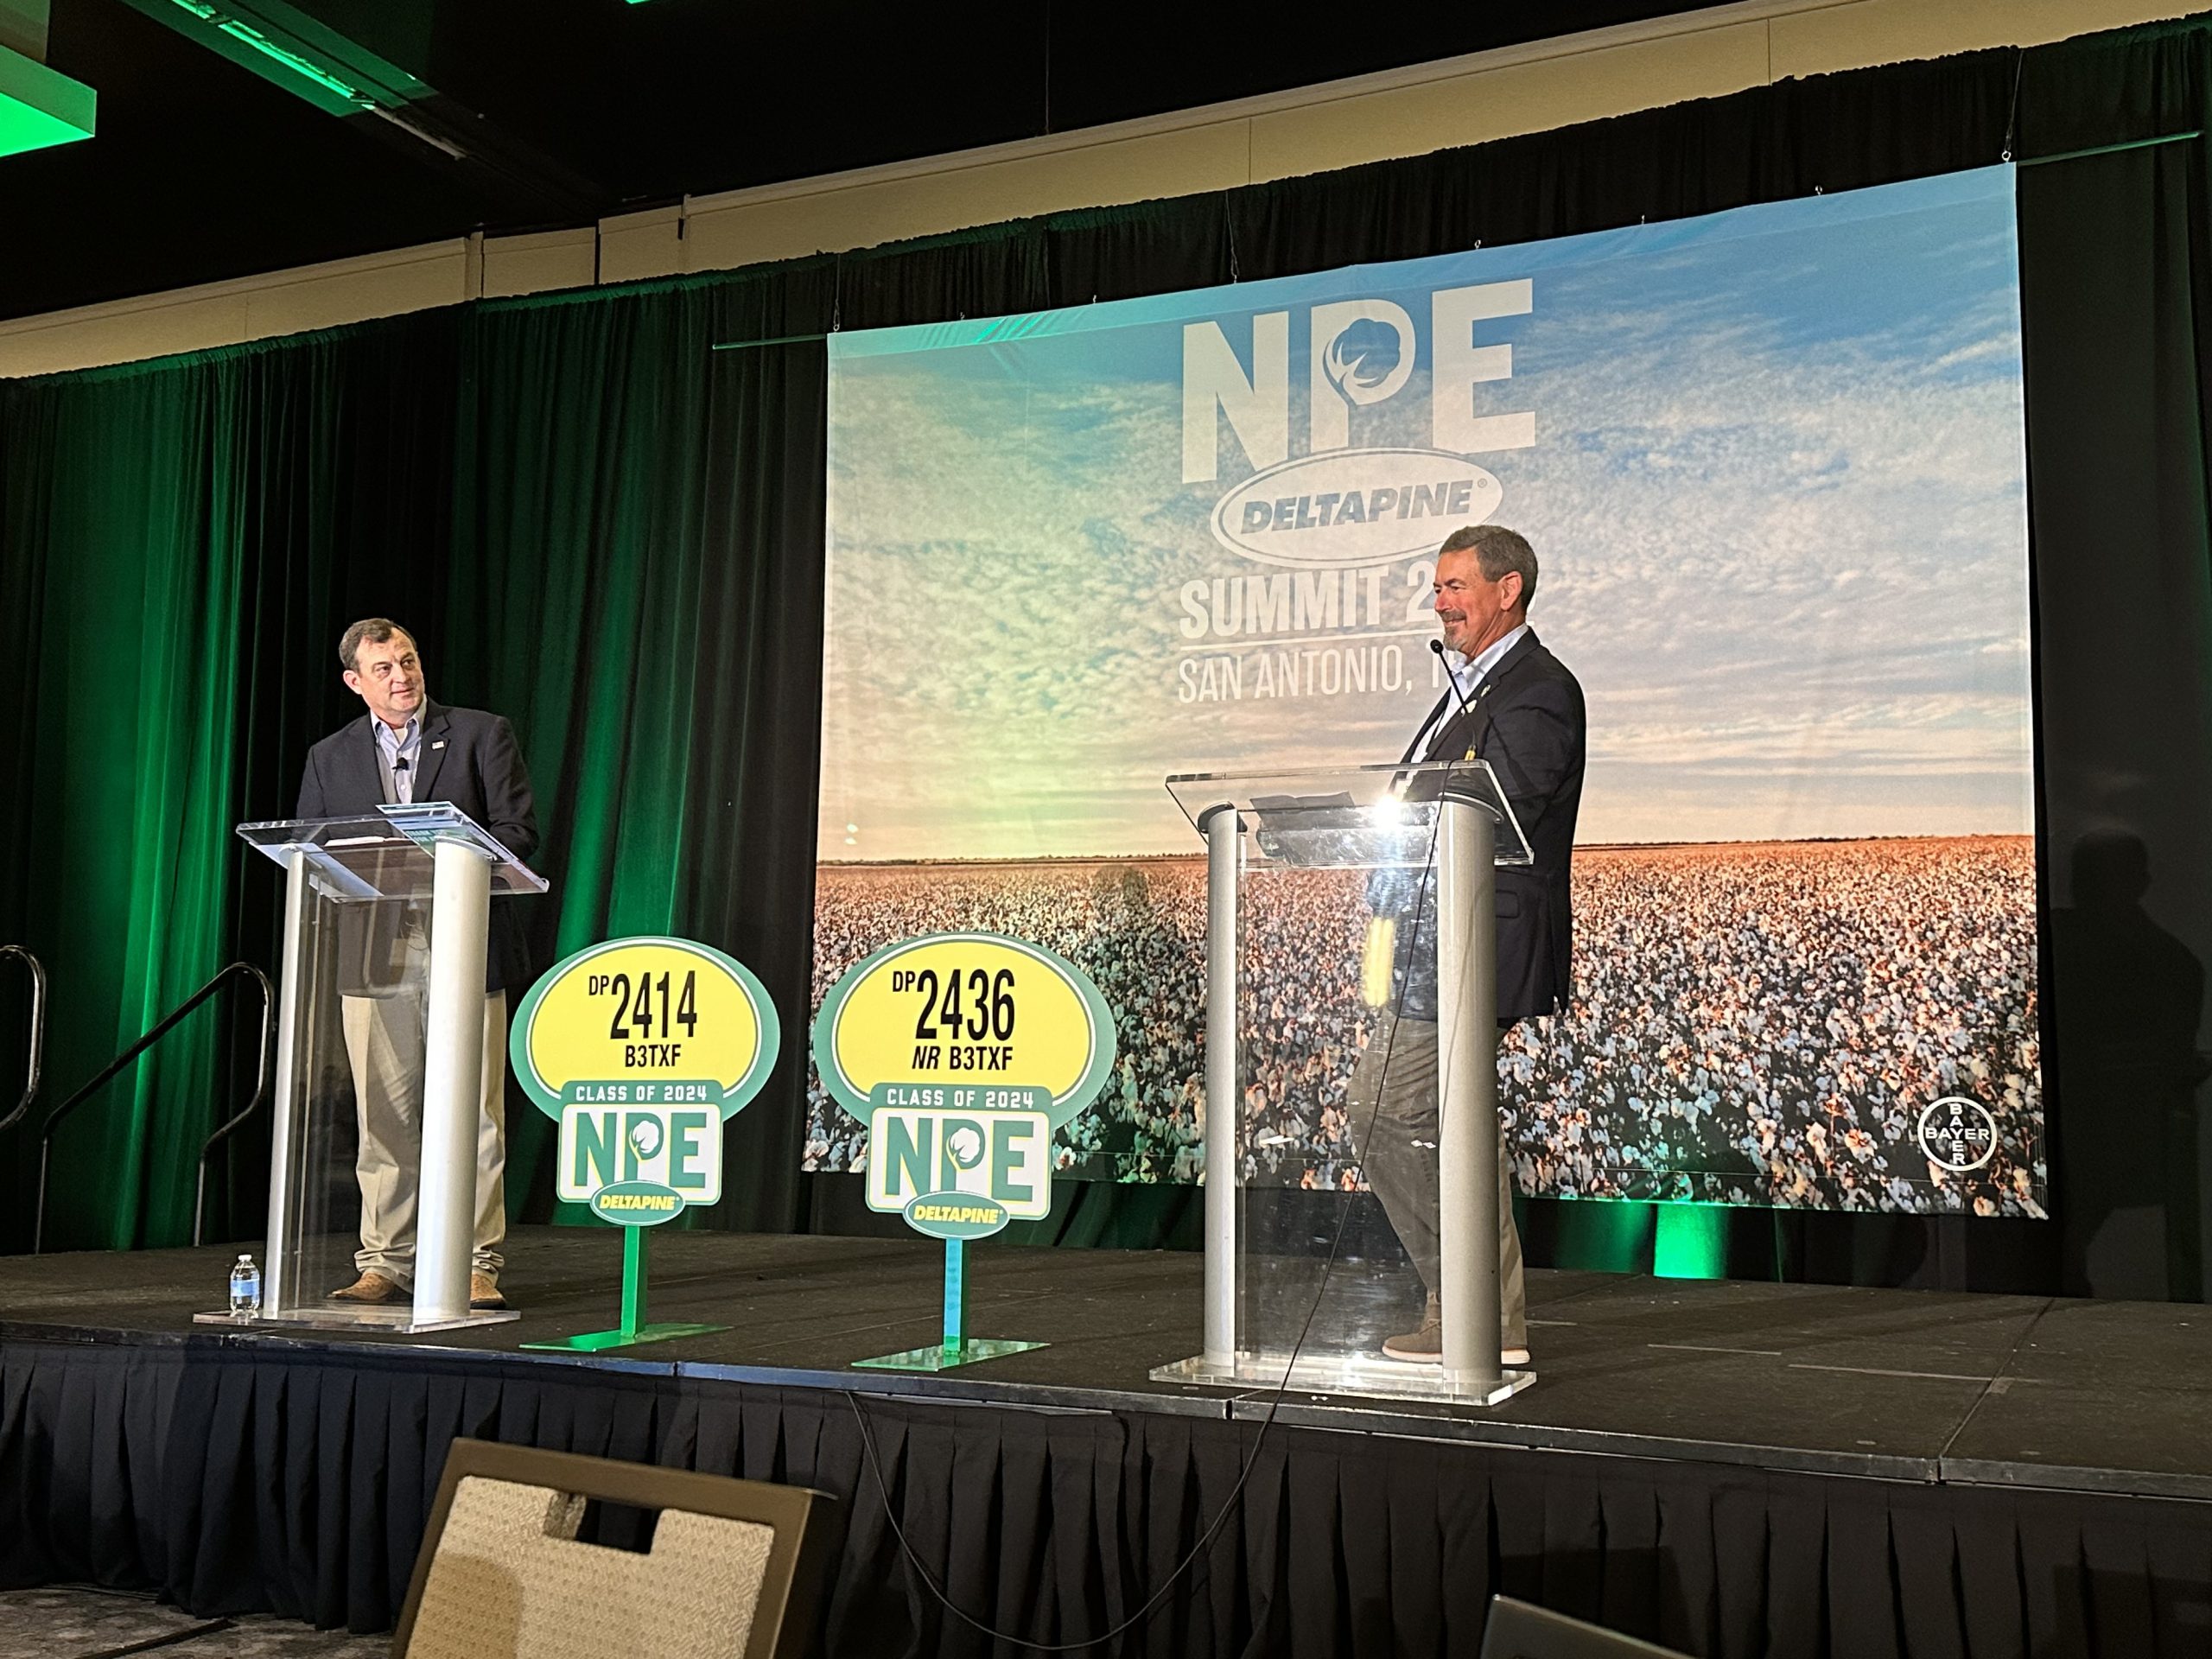 Eric Best, Deltapine cotton product manager and Dave Albers, Deltapine cotton product development manager, announce the class of 2024 Deltapine cotton varieties at NPE Summit in San Antonio, Texas. (Journal photo by Lacey Vilhauer.)